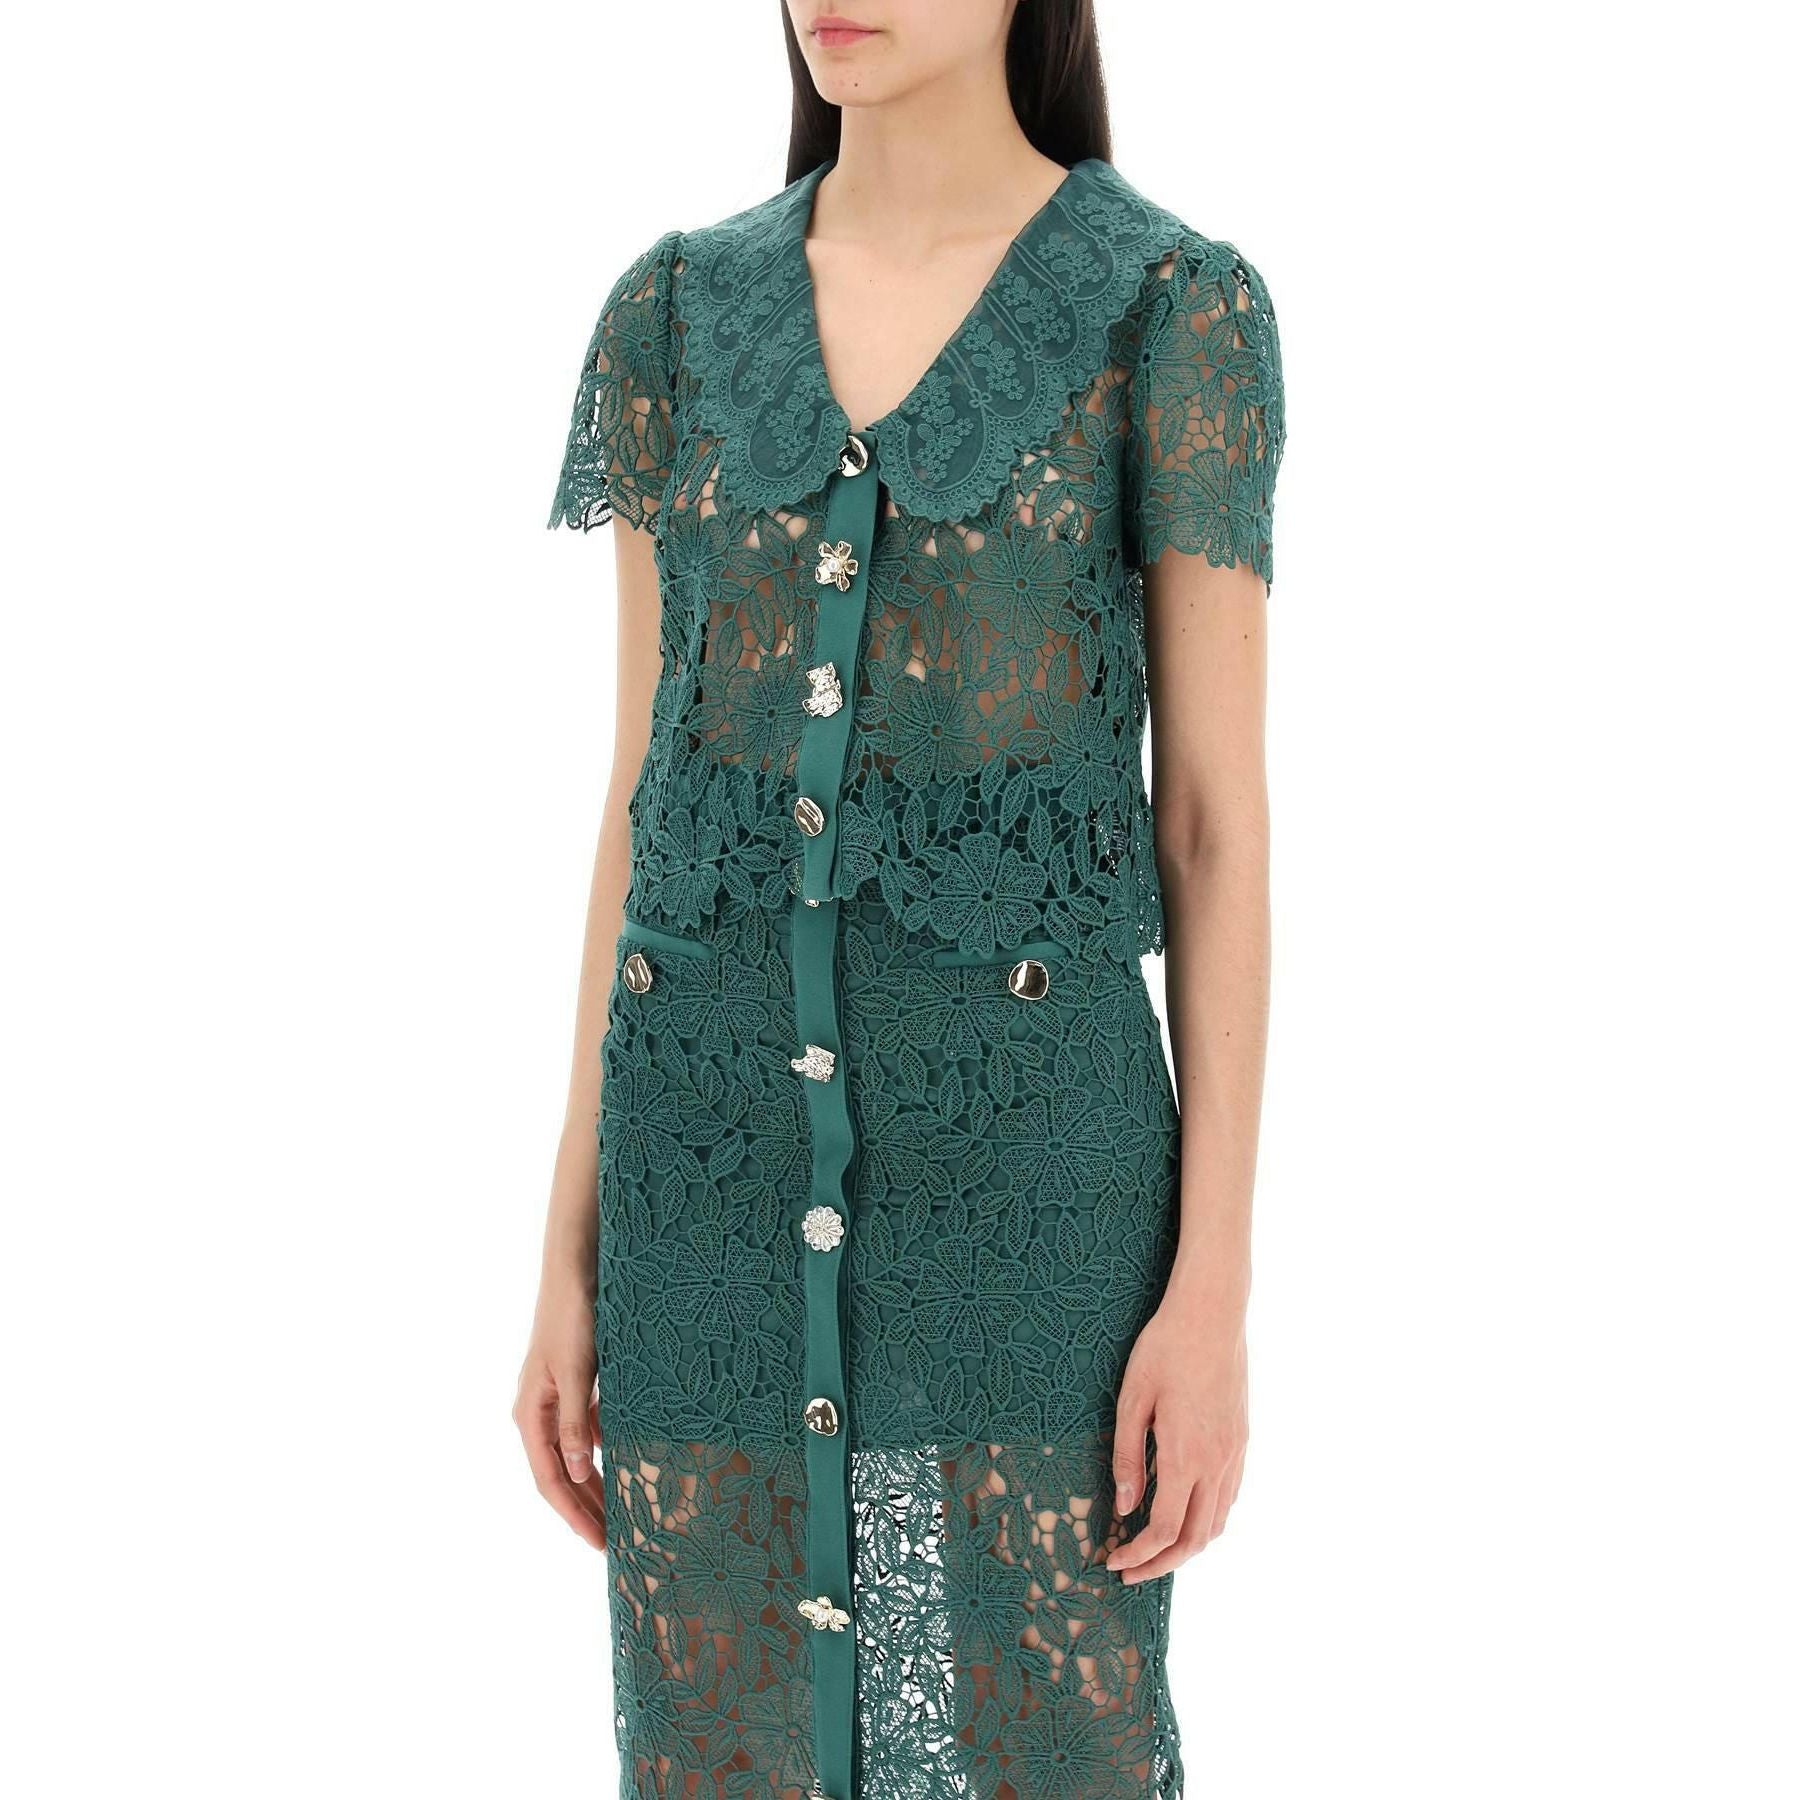 Green Floral Guipure Lace Top With Chelsea Collar And Jewel Buttons SELF PORTRAIT JOHN JULIA.